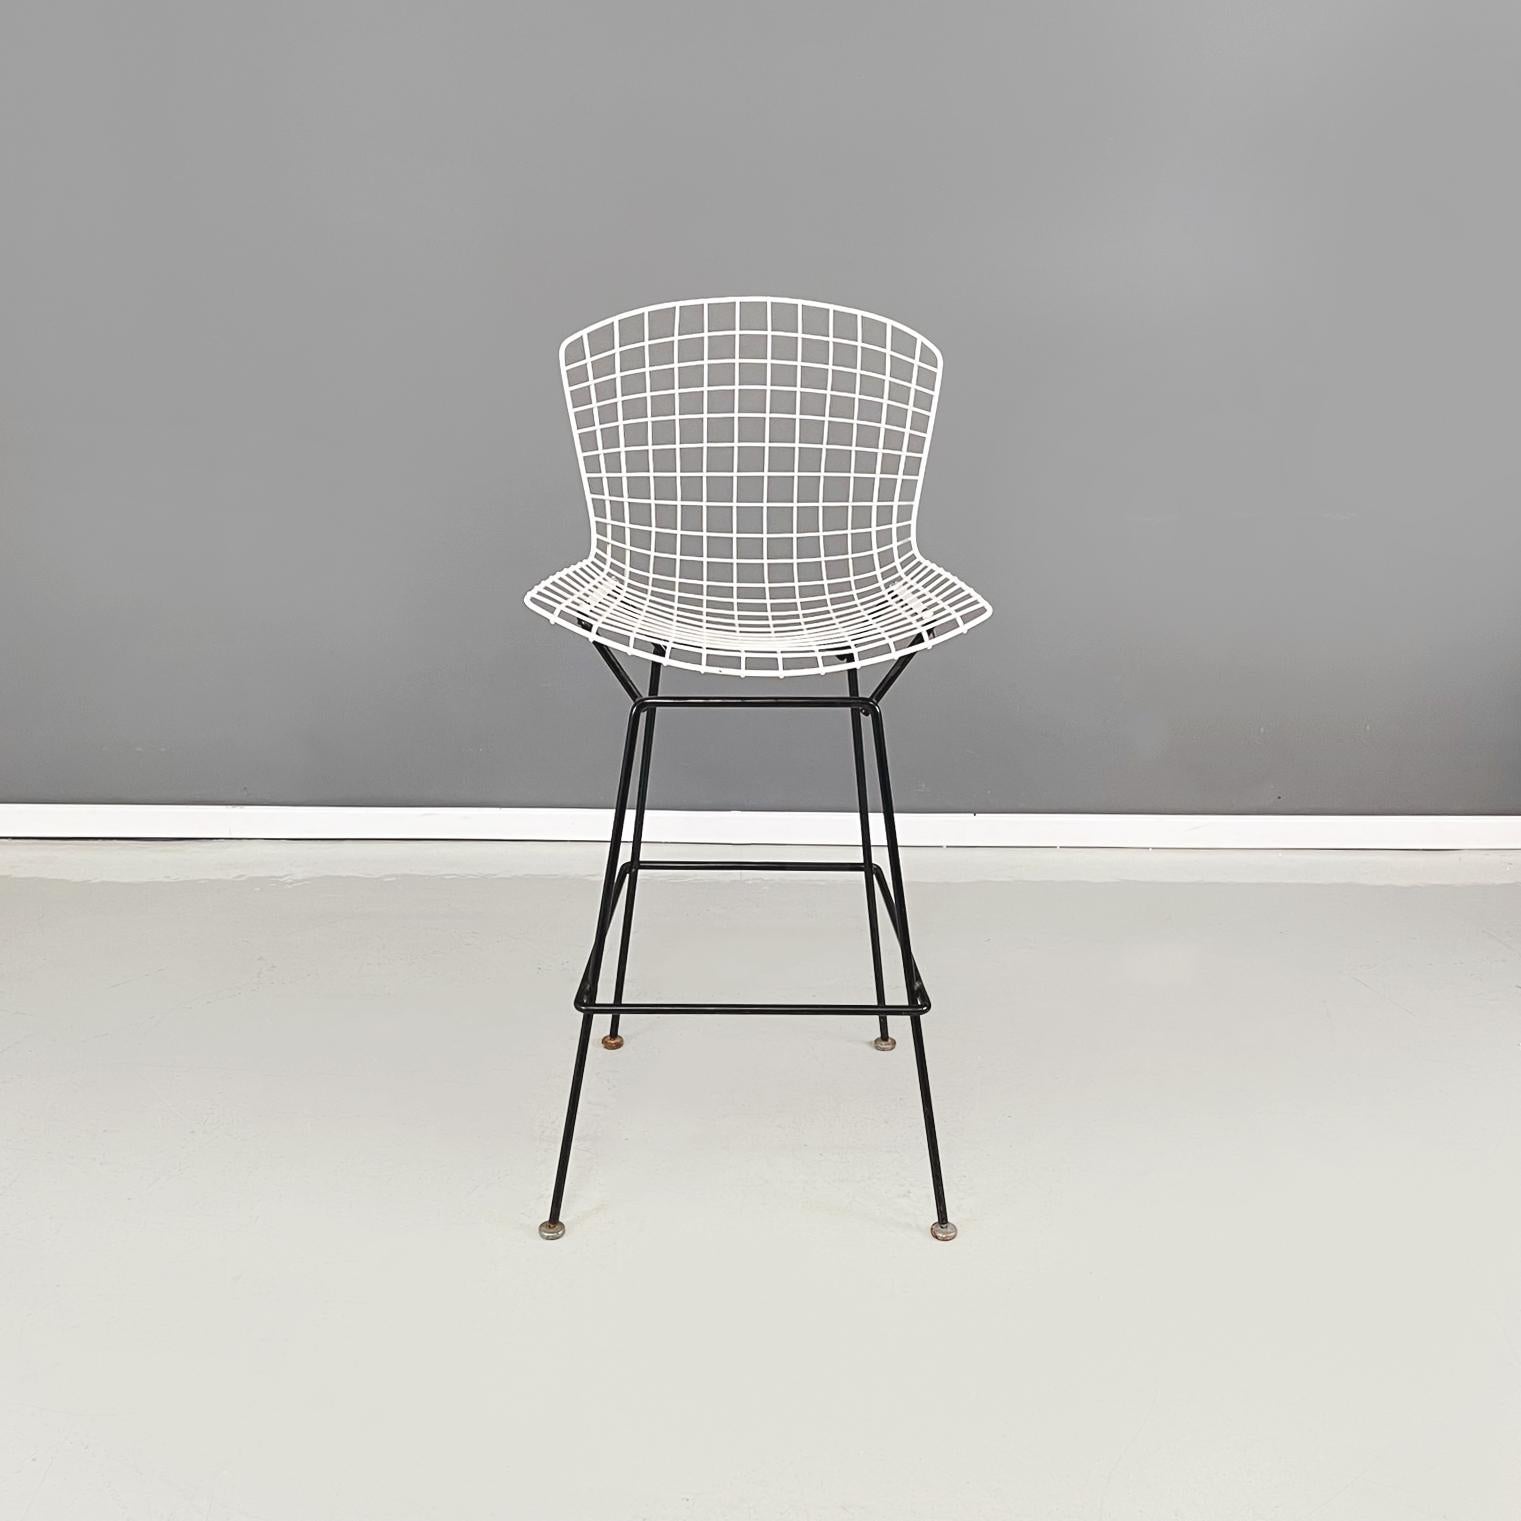 American mid-century Black and white metal High stools by Harry Bertoia for Knoll, 1960s
Set of 4 high bar stools with seat and back made of a white painted metal rod net. The structure is in black painted metal rod. Footrest present at the base of